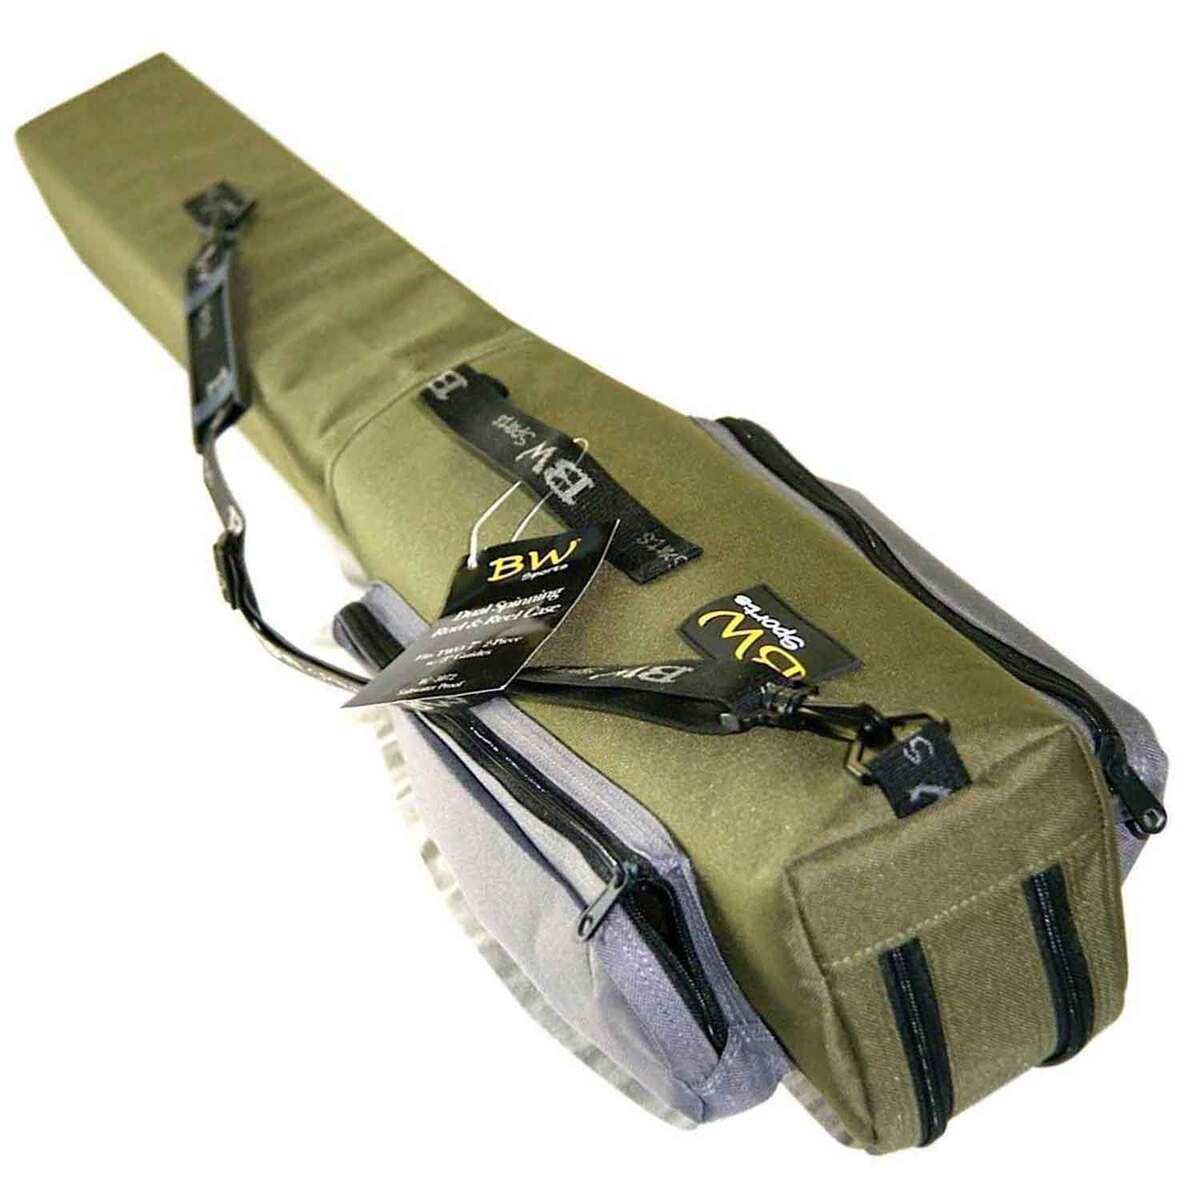 BW Sports 7 ft. Spinning Rod and Reel Case Offers Complete